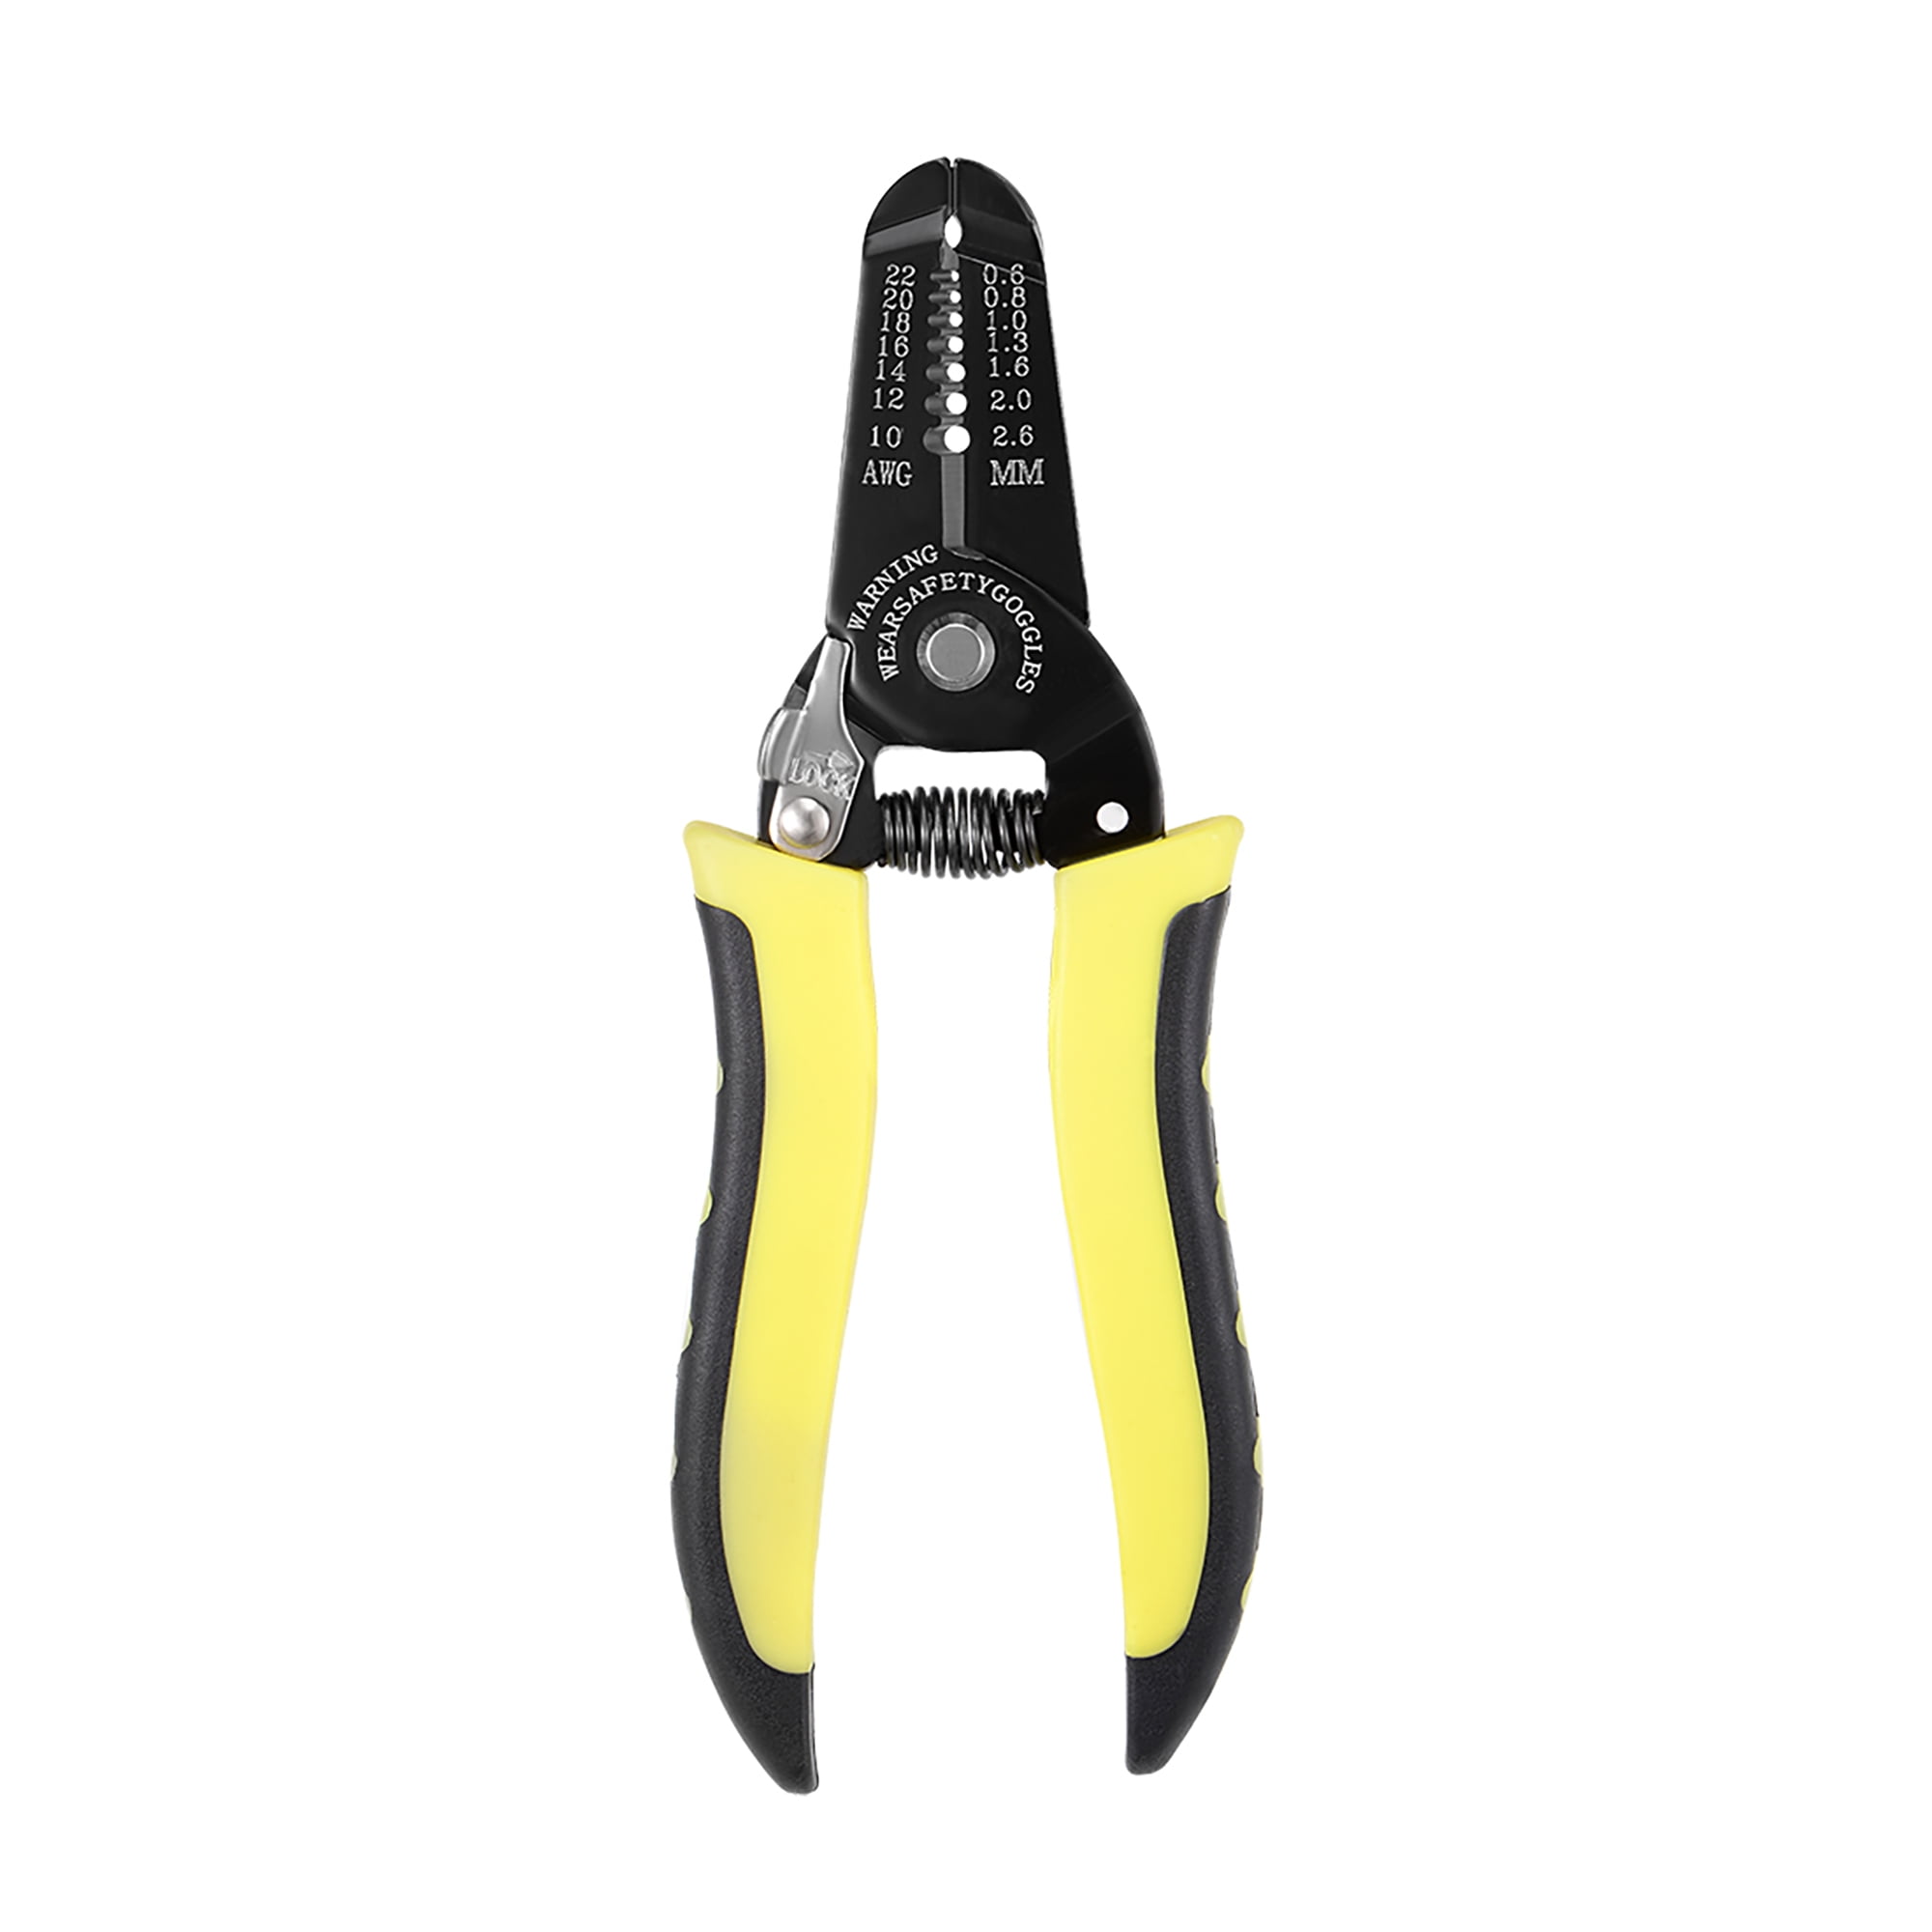 Multi-Purpose Electrical Wire Stripping Tool Snips Crimpers Pliers,10-22 AWG 